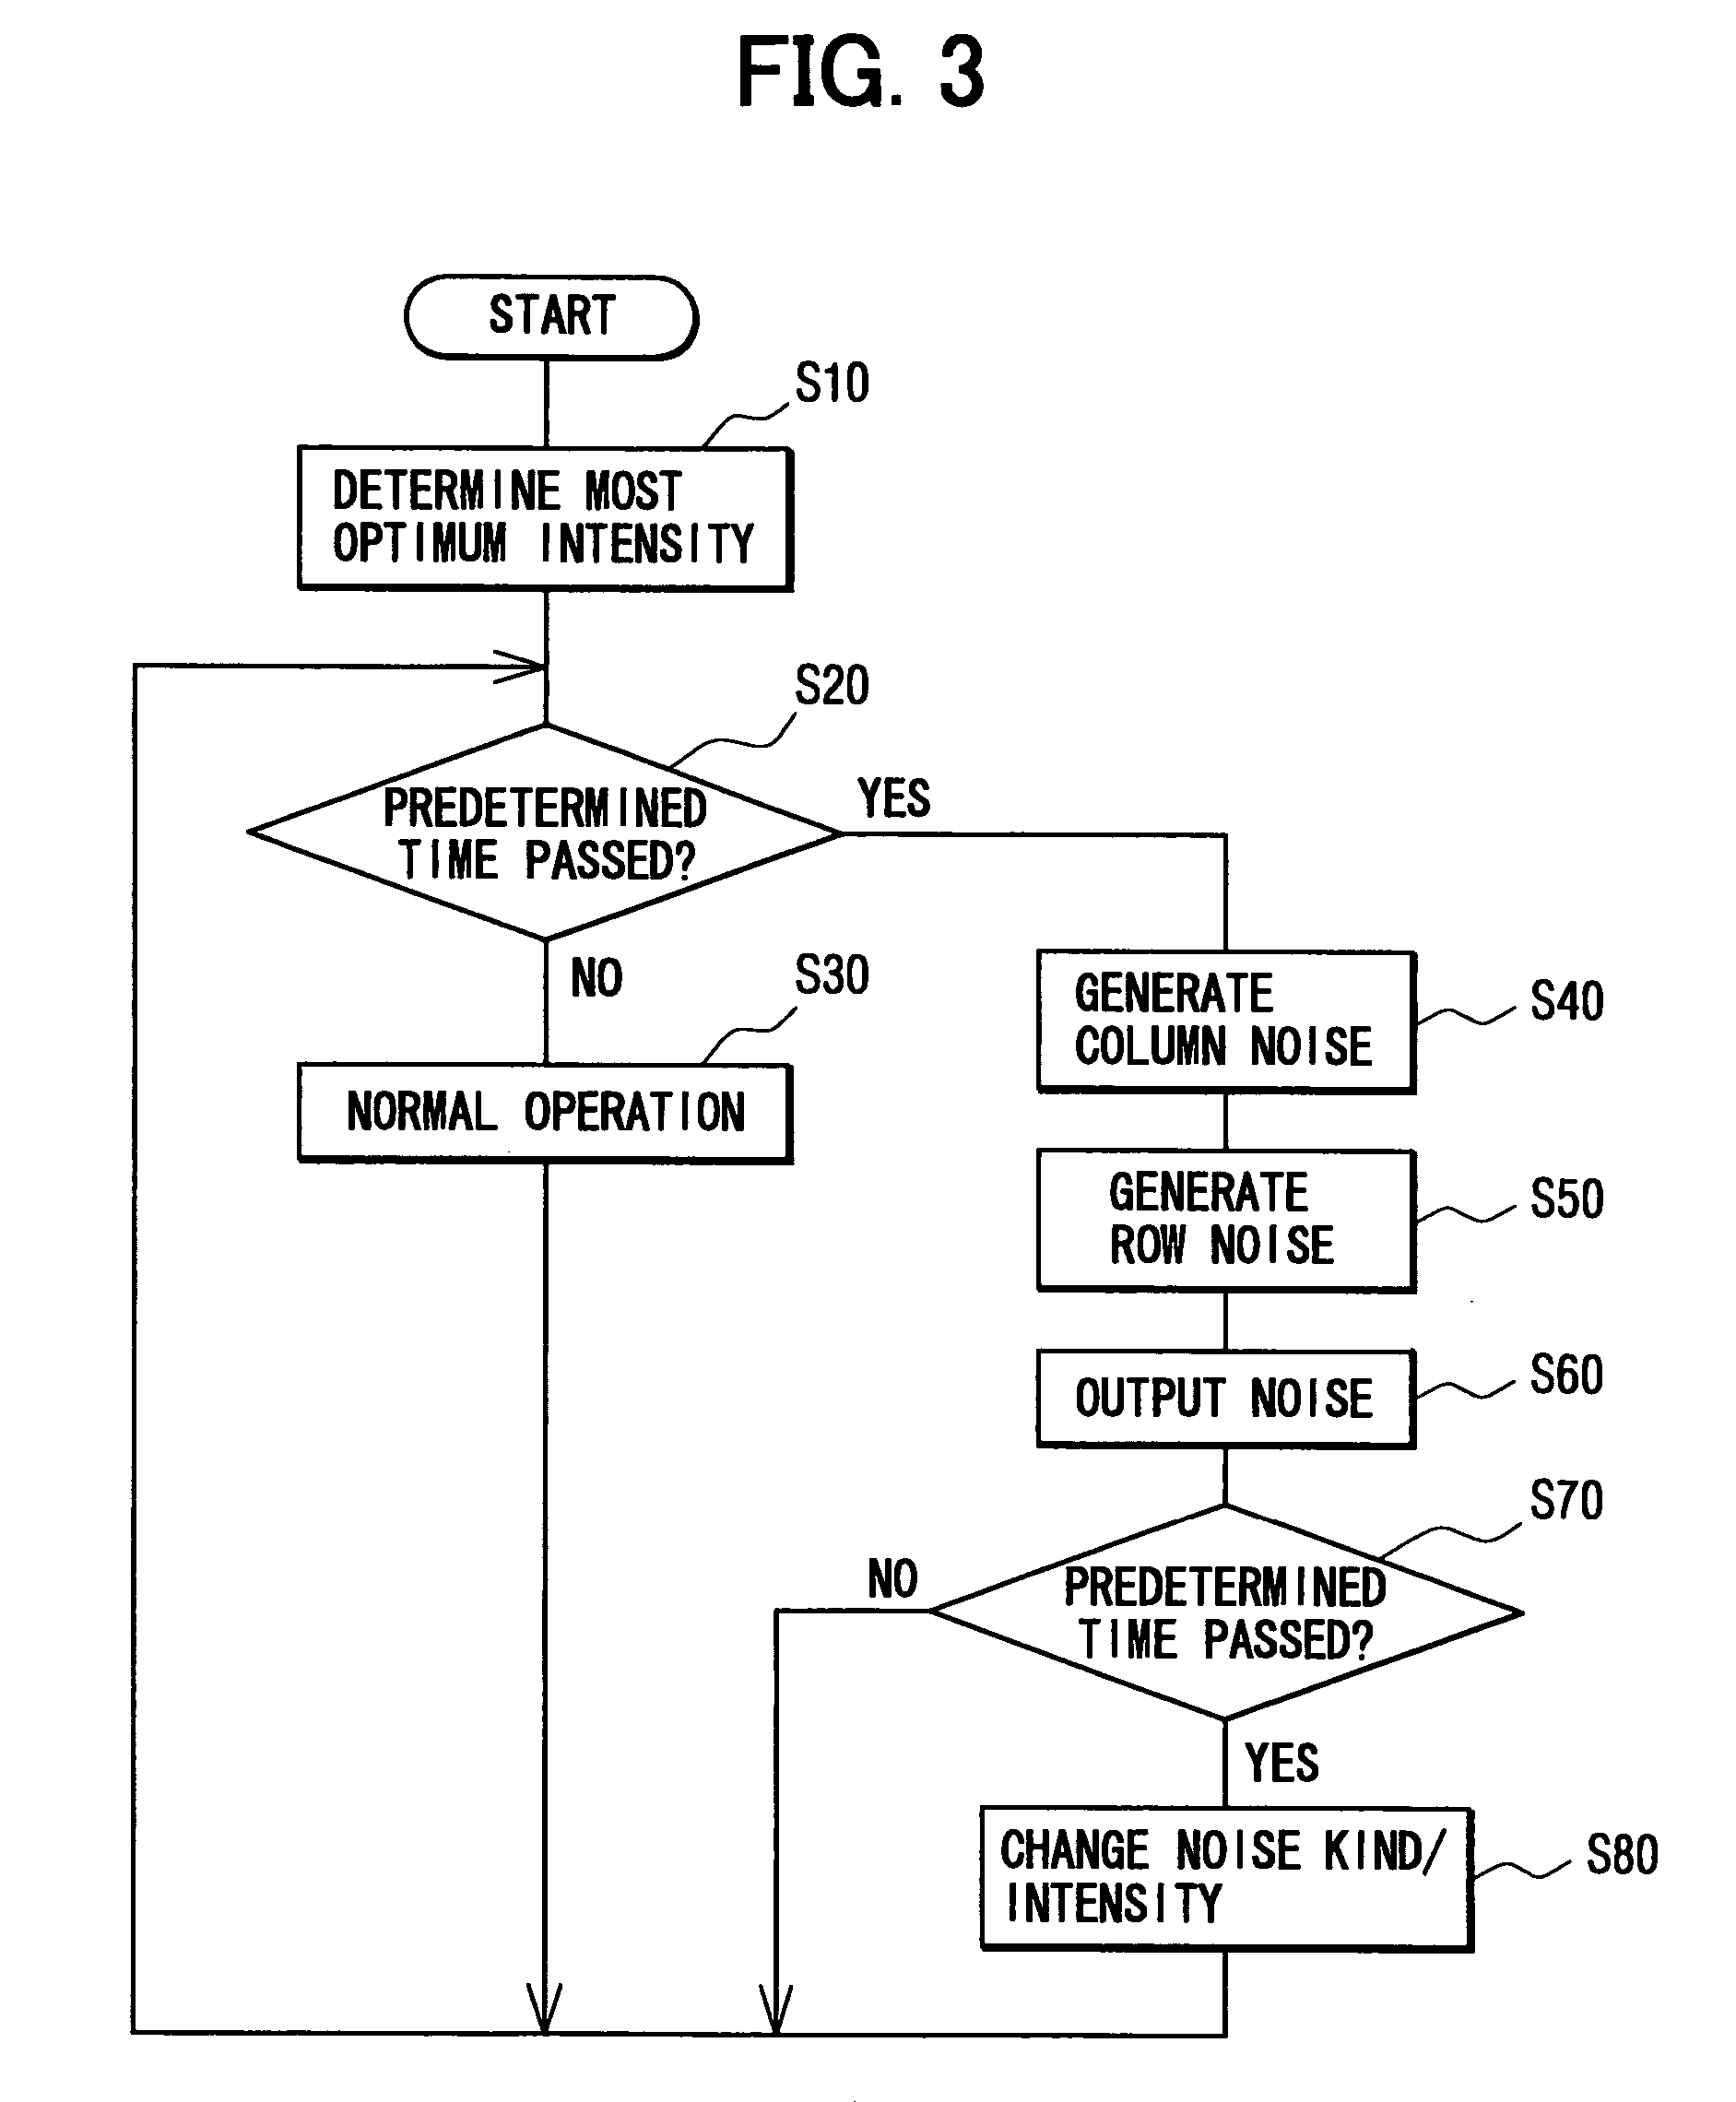 Visual ability improvement supporting device